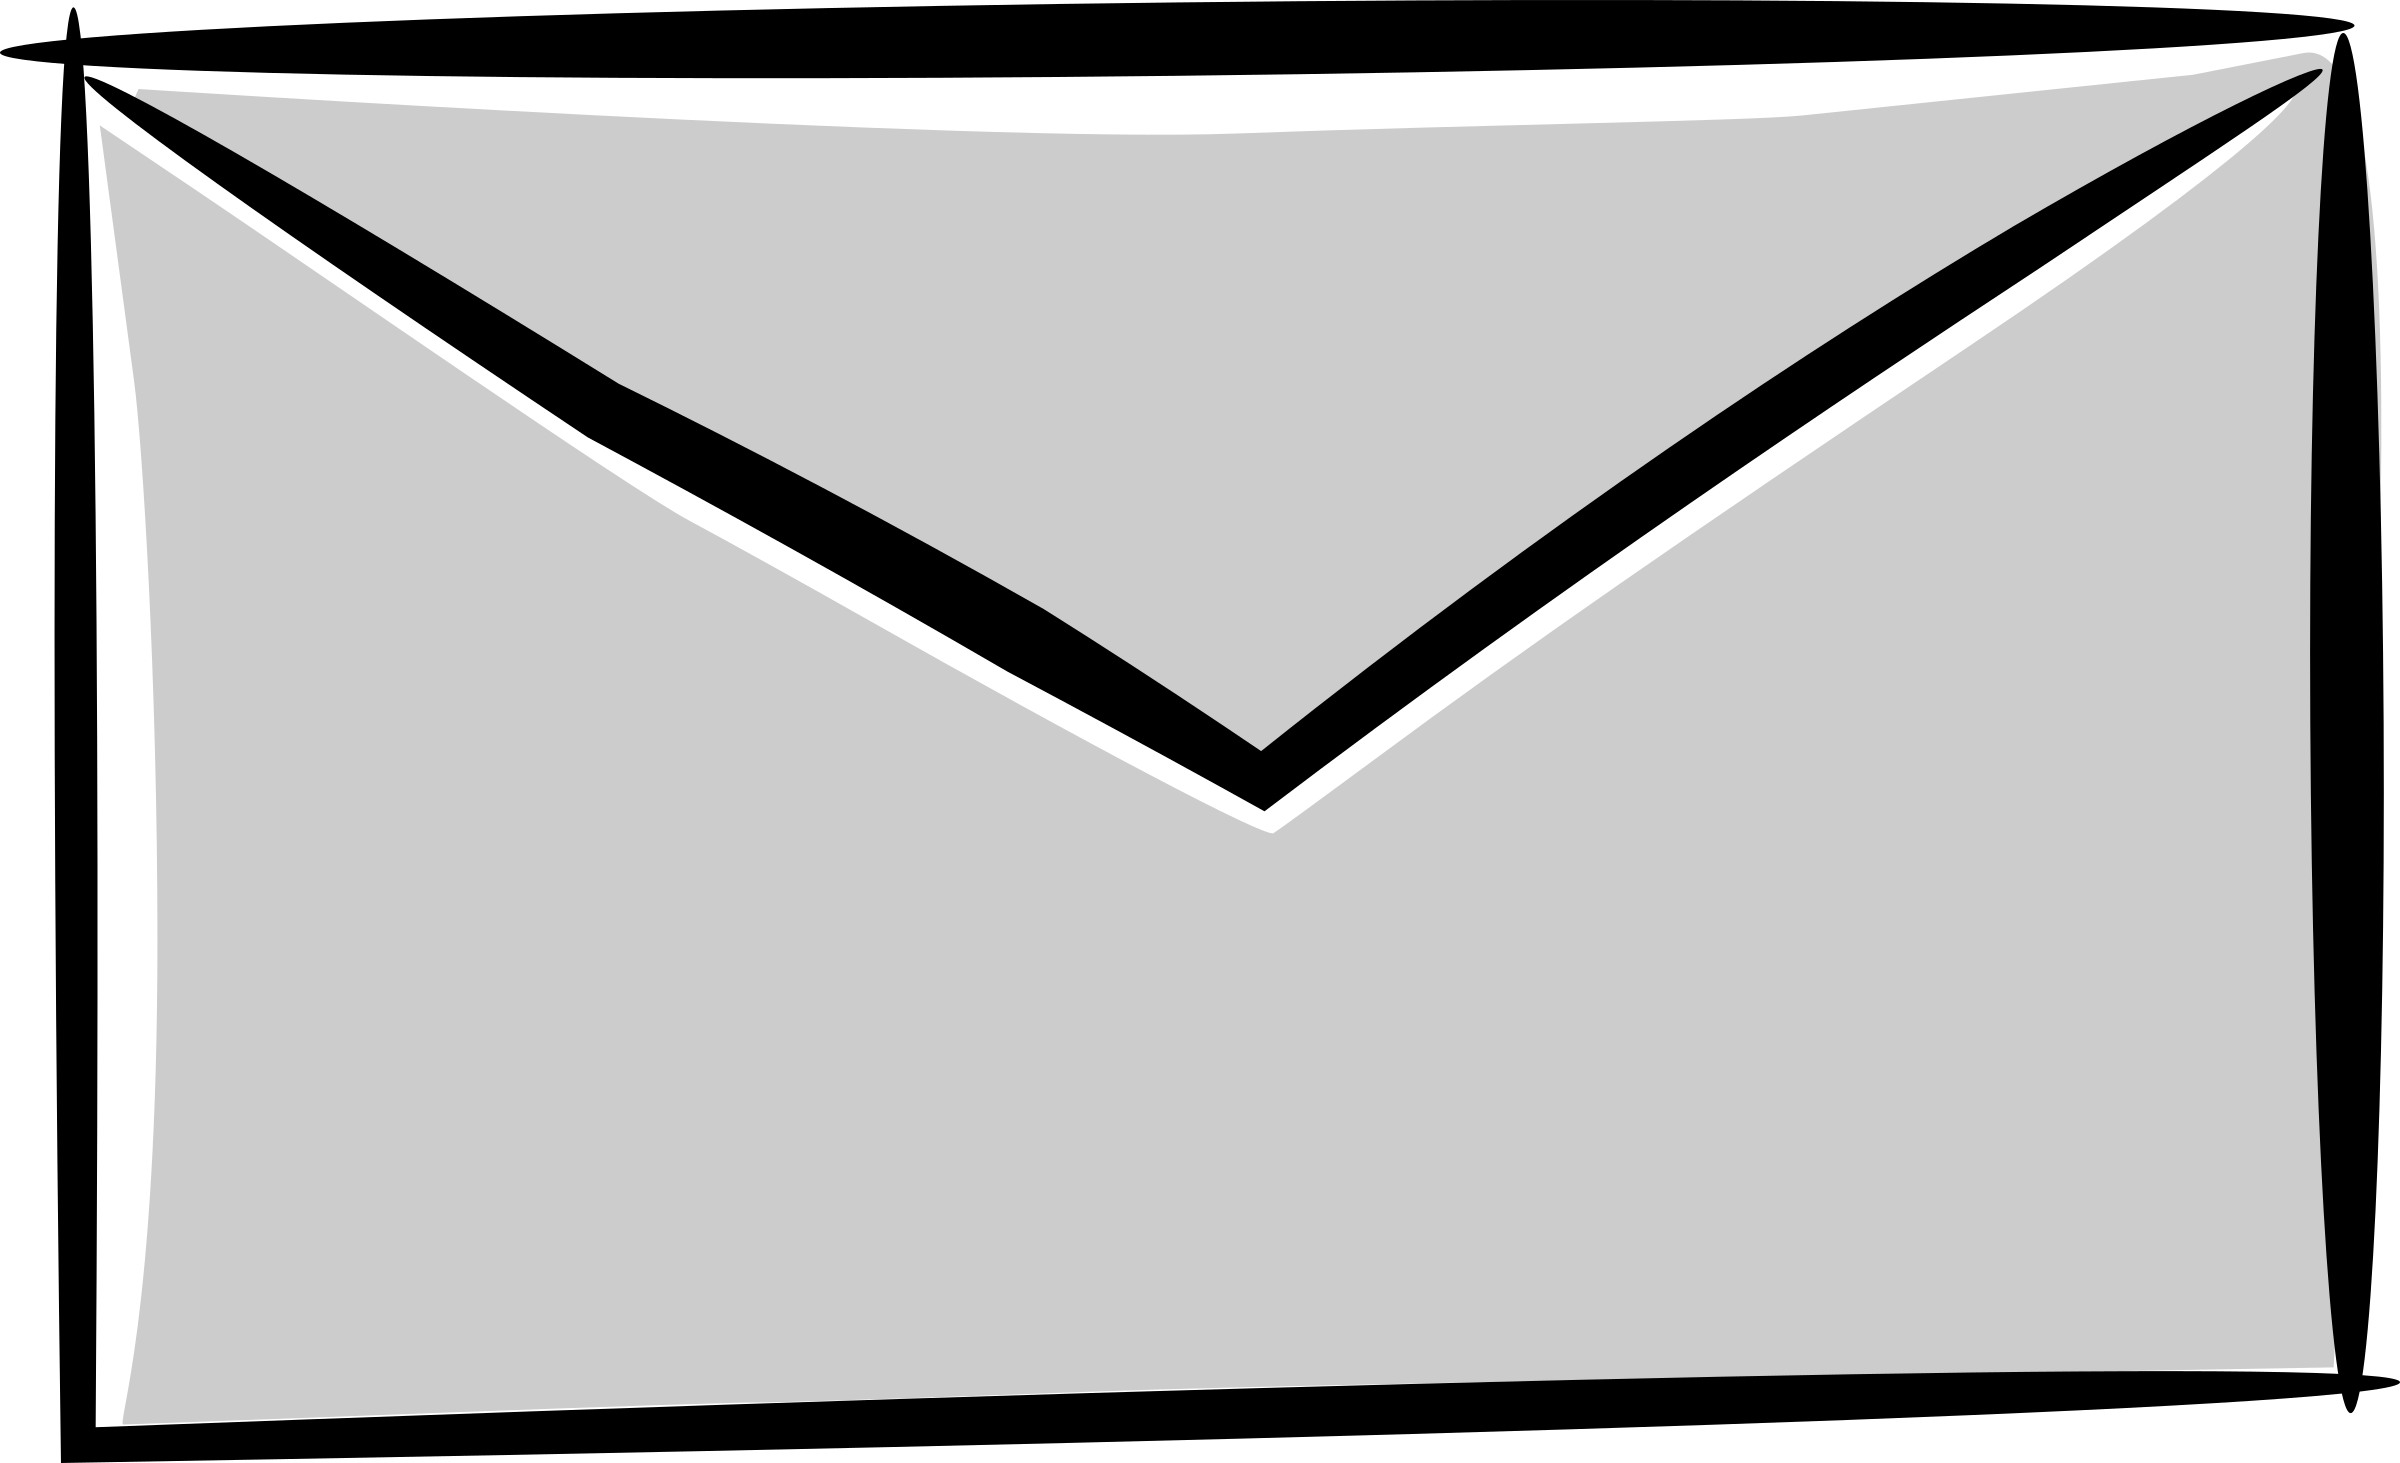 Mail big image png. Email clipart small envelope